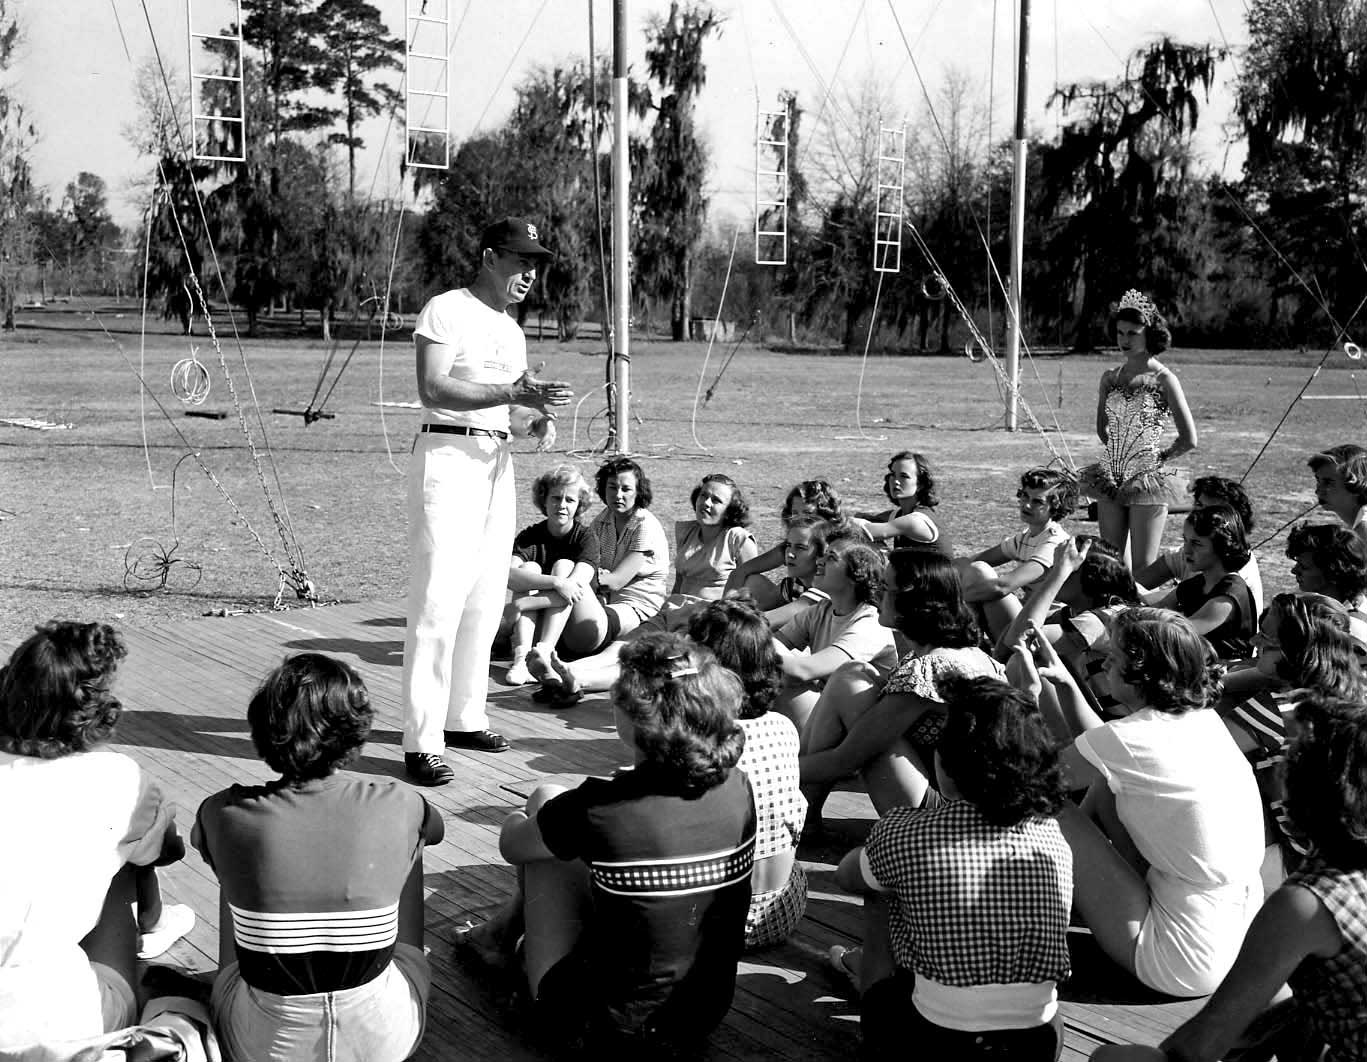 Jack Haskin, founder of the FSU Flying High Circus, instructs students during a practice in 1951. (FSU Special Collections & Archives)